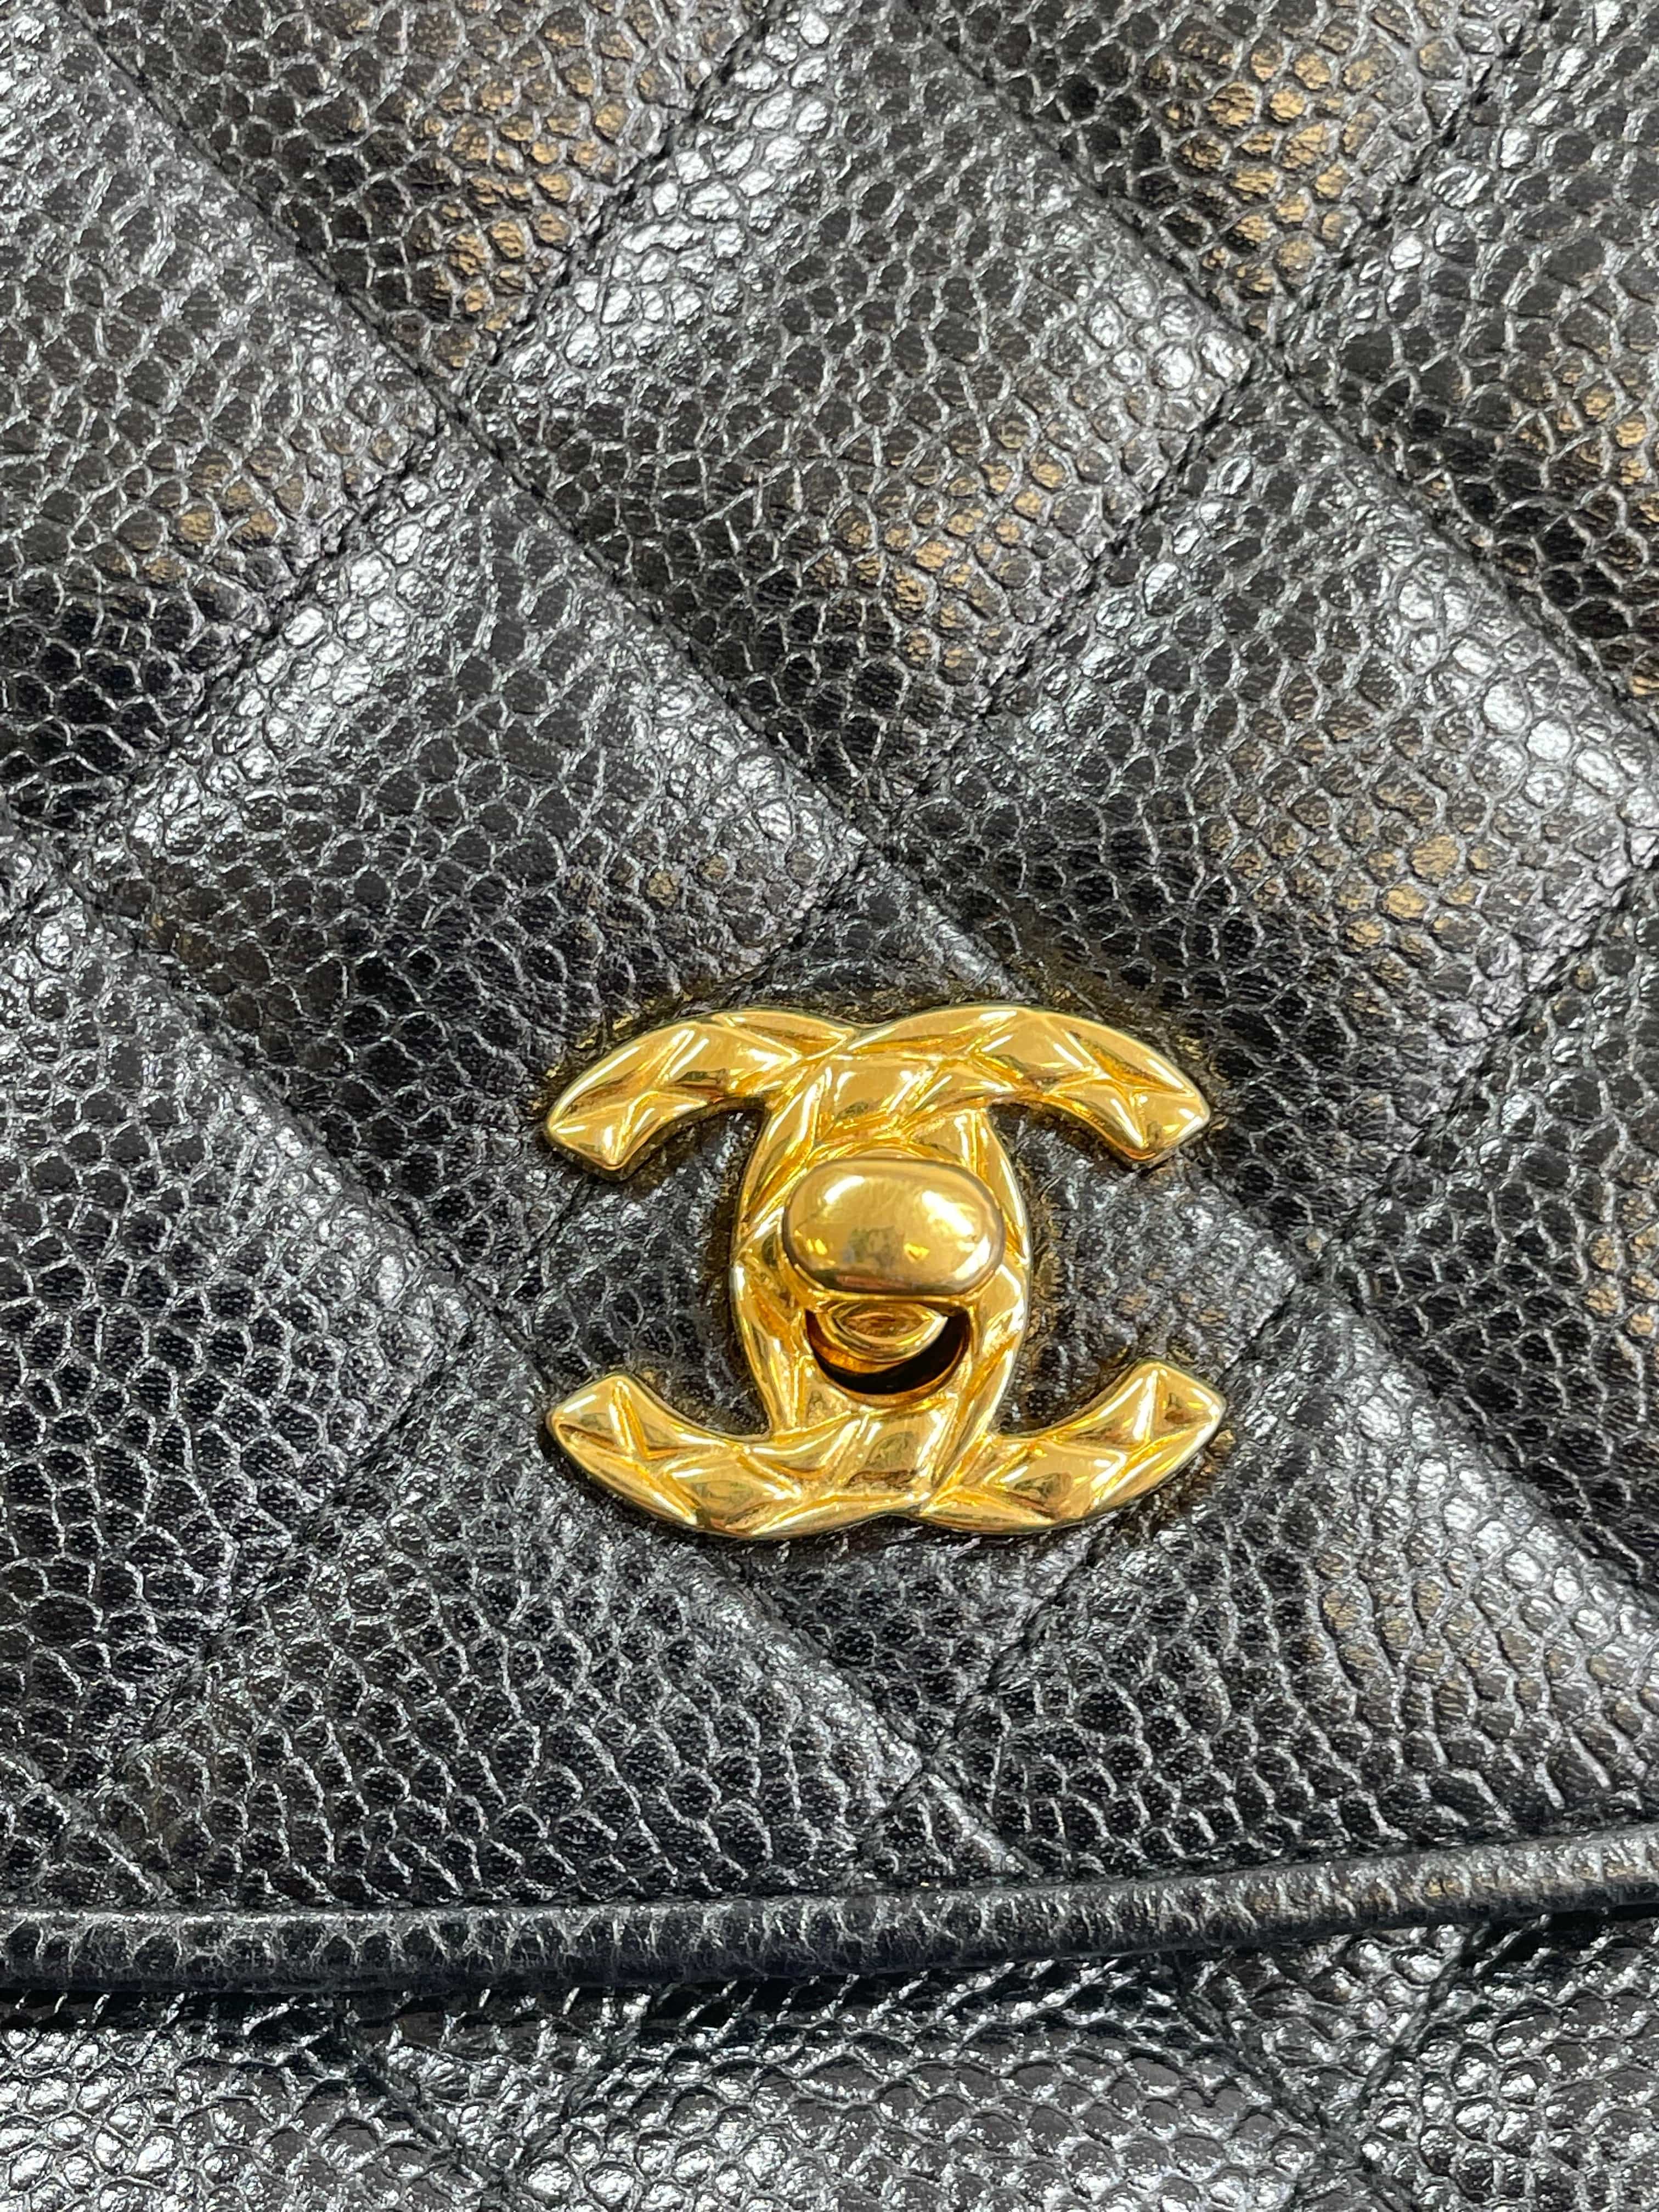 Chanel Chanel Caviar Quilted Shoulder Bag PXL1152